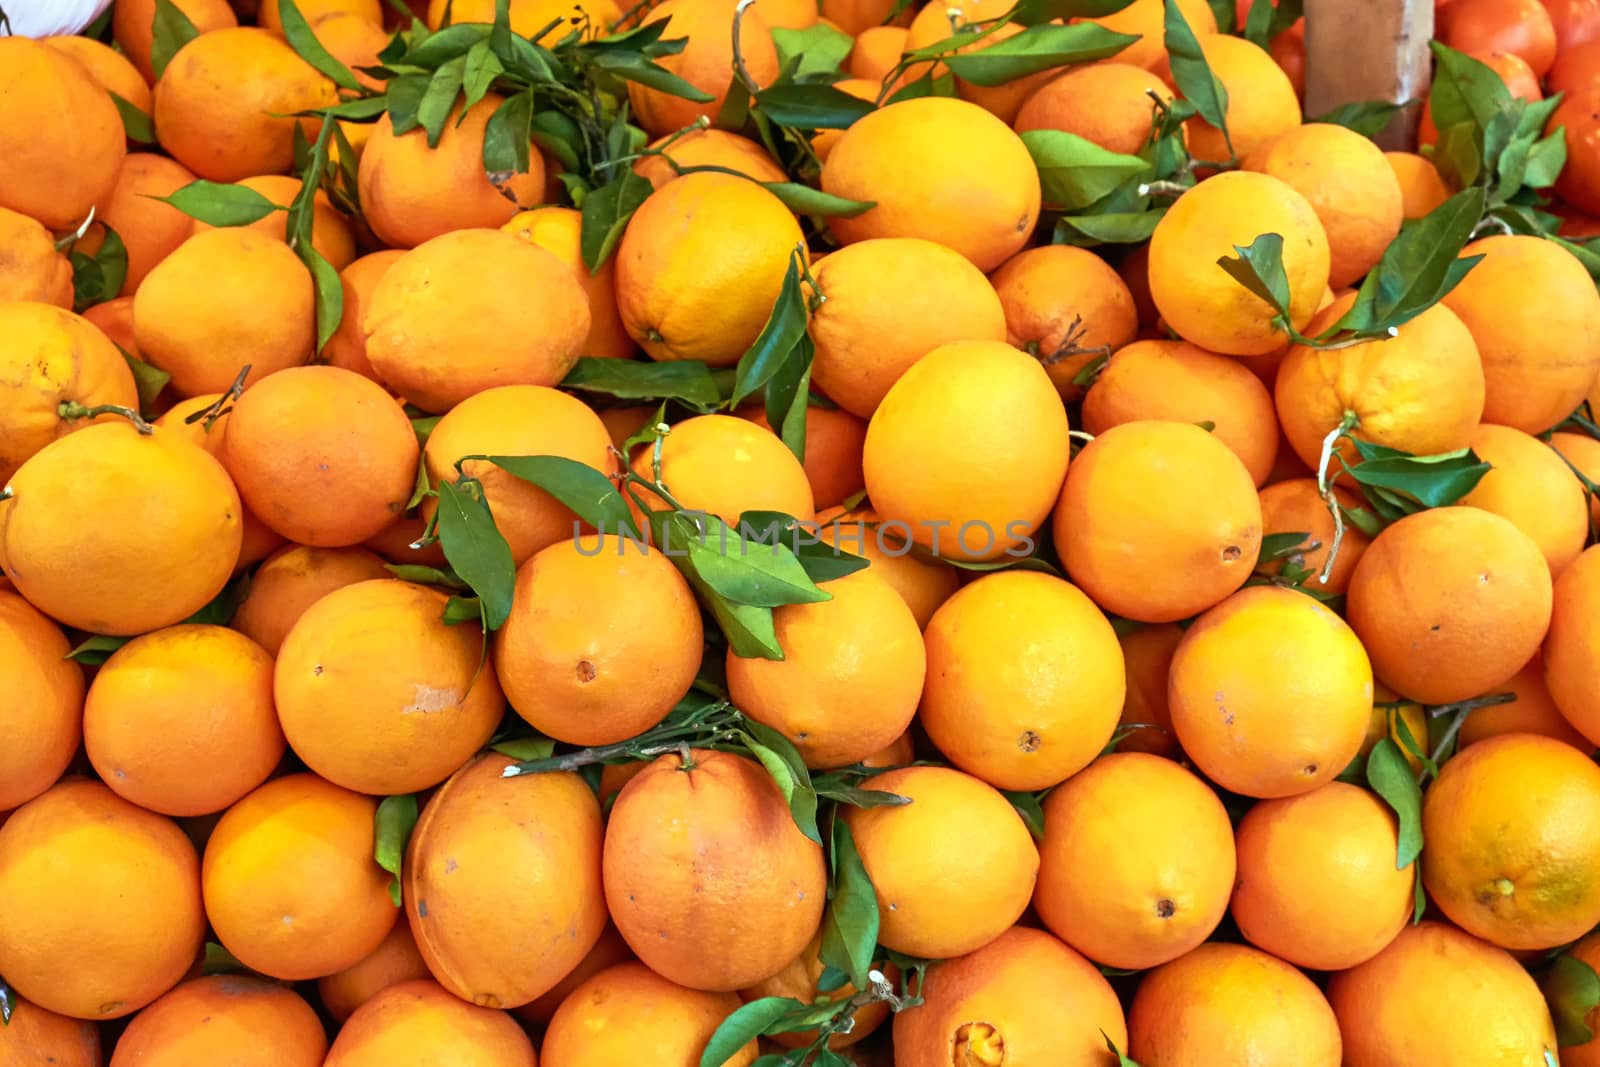 Fresh ripe clementines with green leaves for sale at market